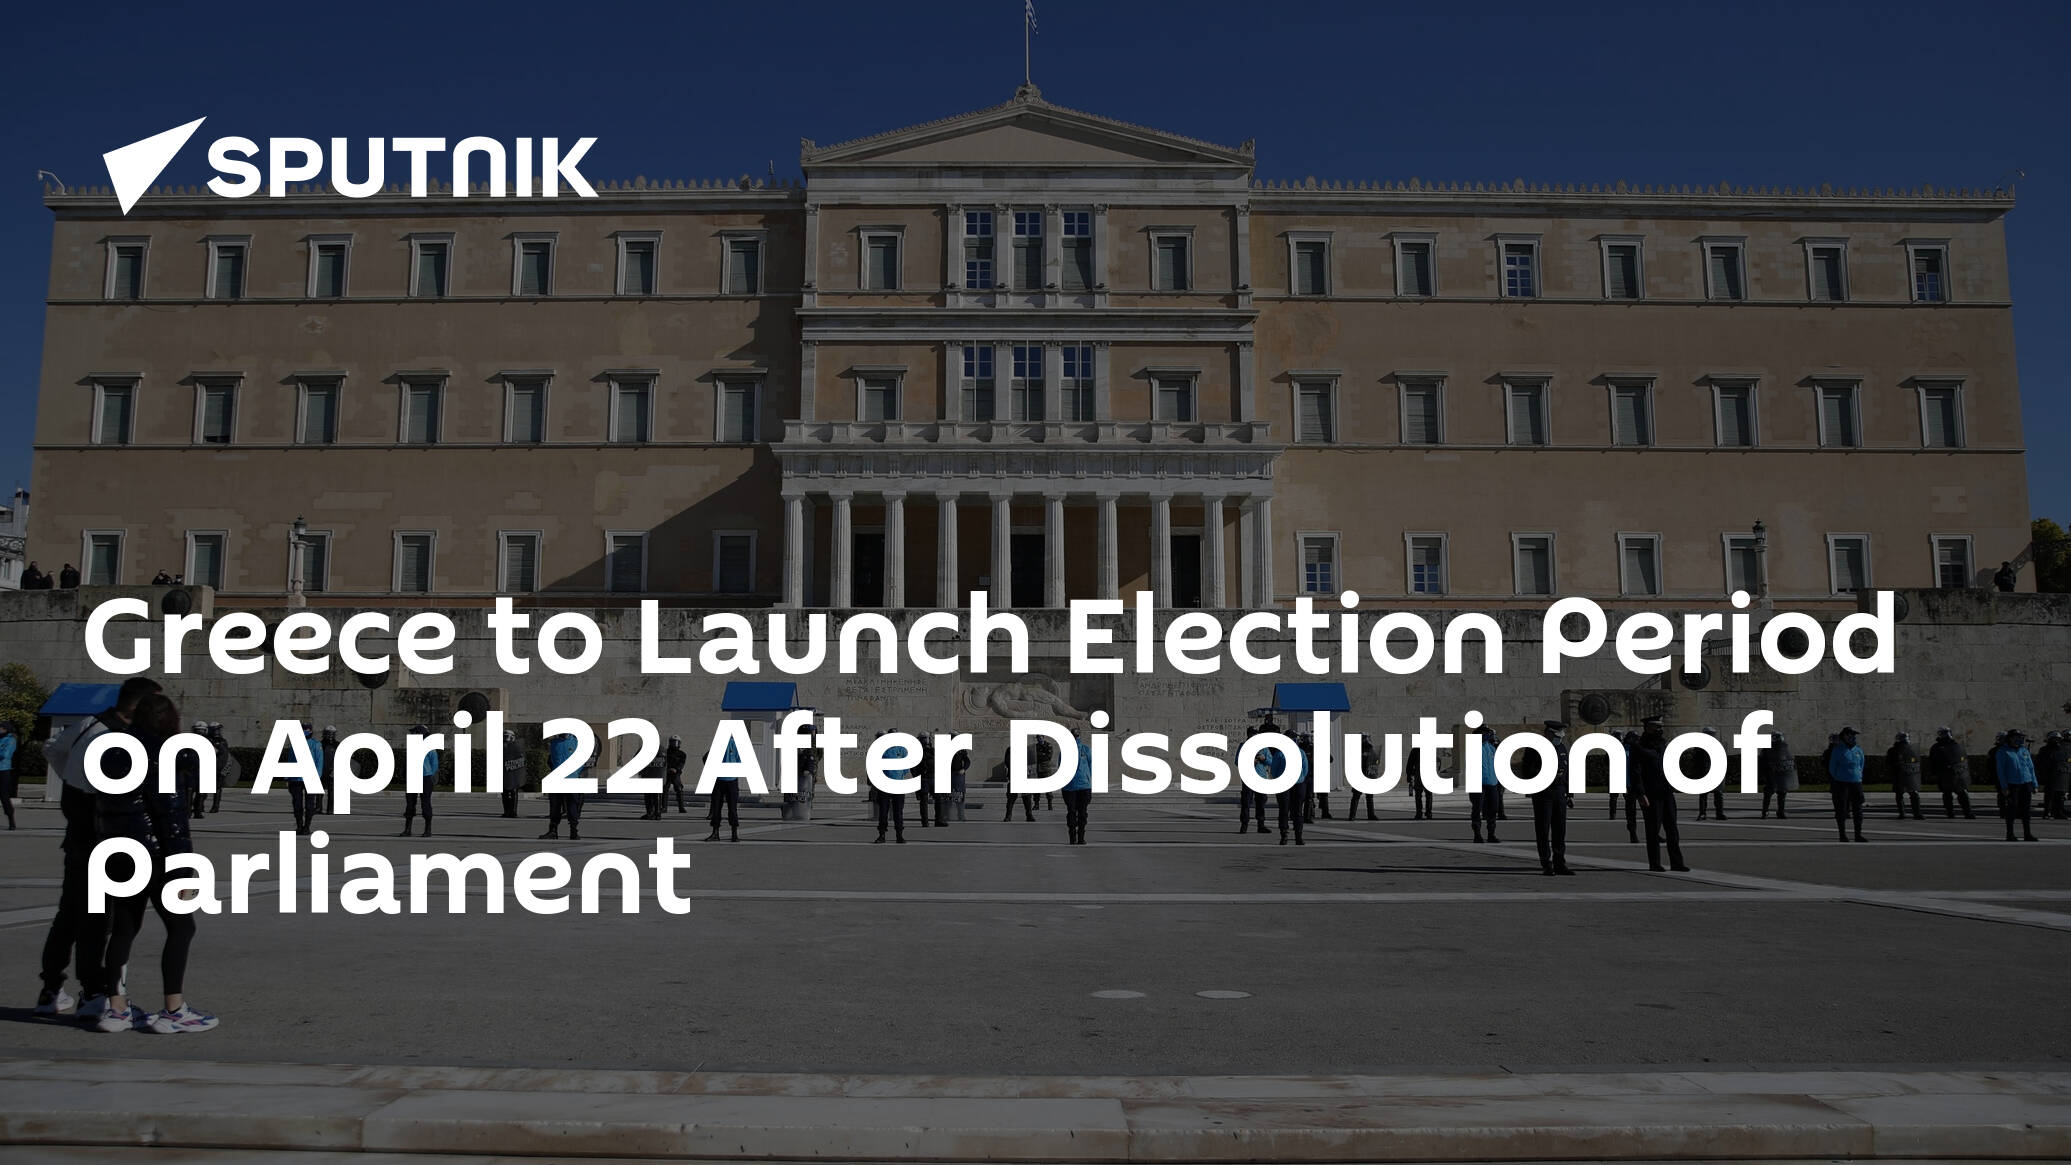 Greece to Launch Election Period on April 22 After Dissolution of Parliament